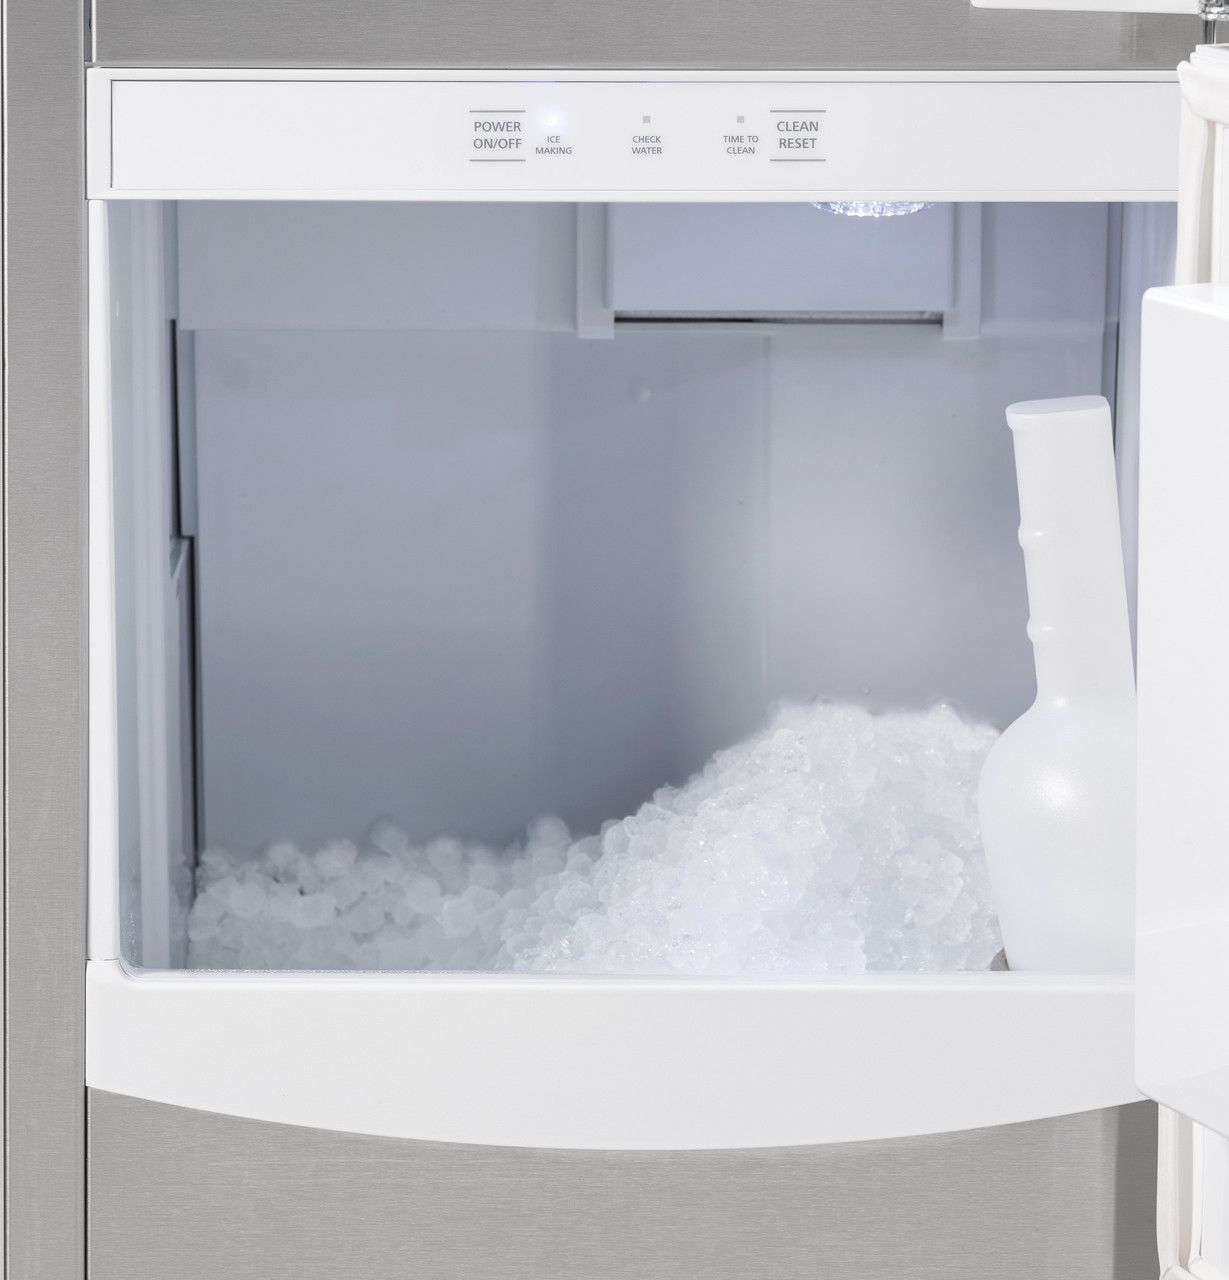 My ice maker stopped working” - Here's what you can do